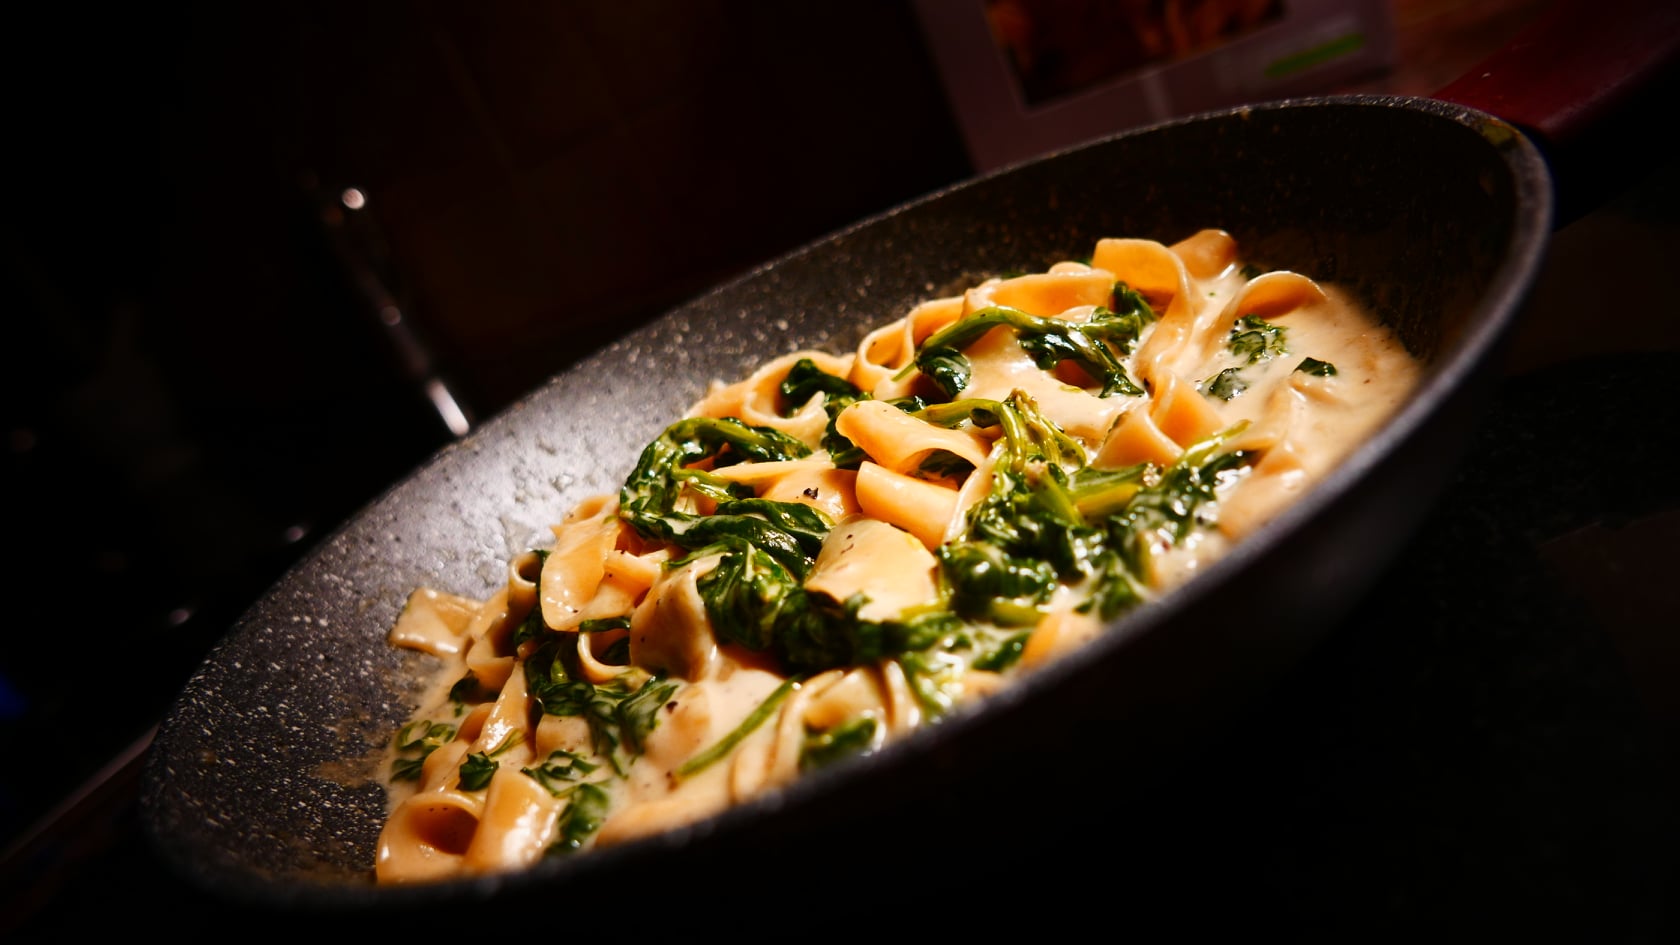 Pappardelle with Spinach in a Grana and Nutmeg Cream Sauce